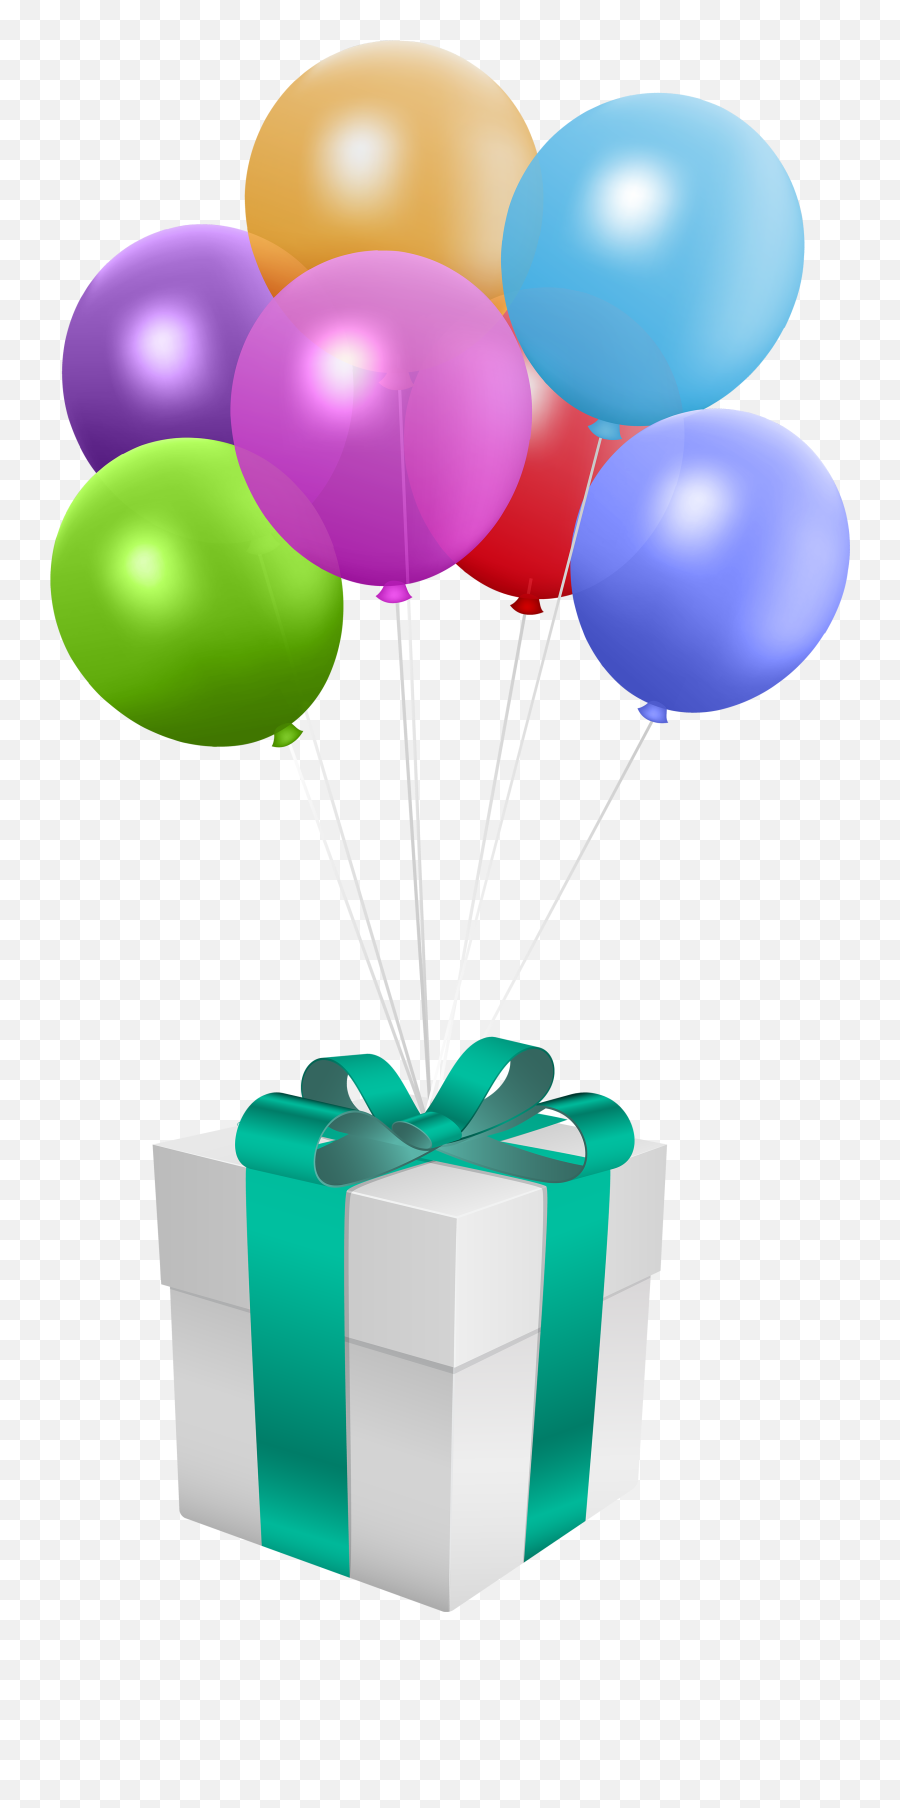 Balloon Birthday Balloons Transparent - Gift Box With Balloons Png ...